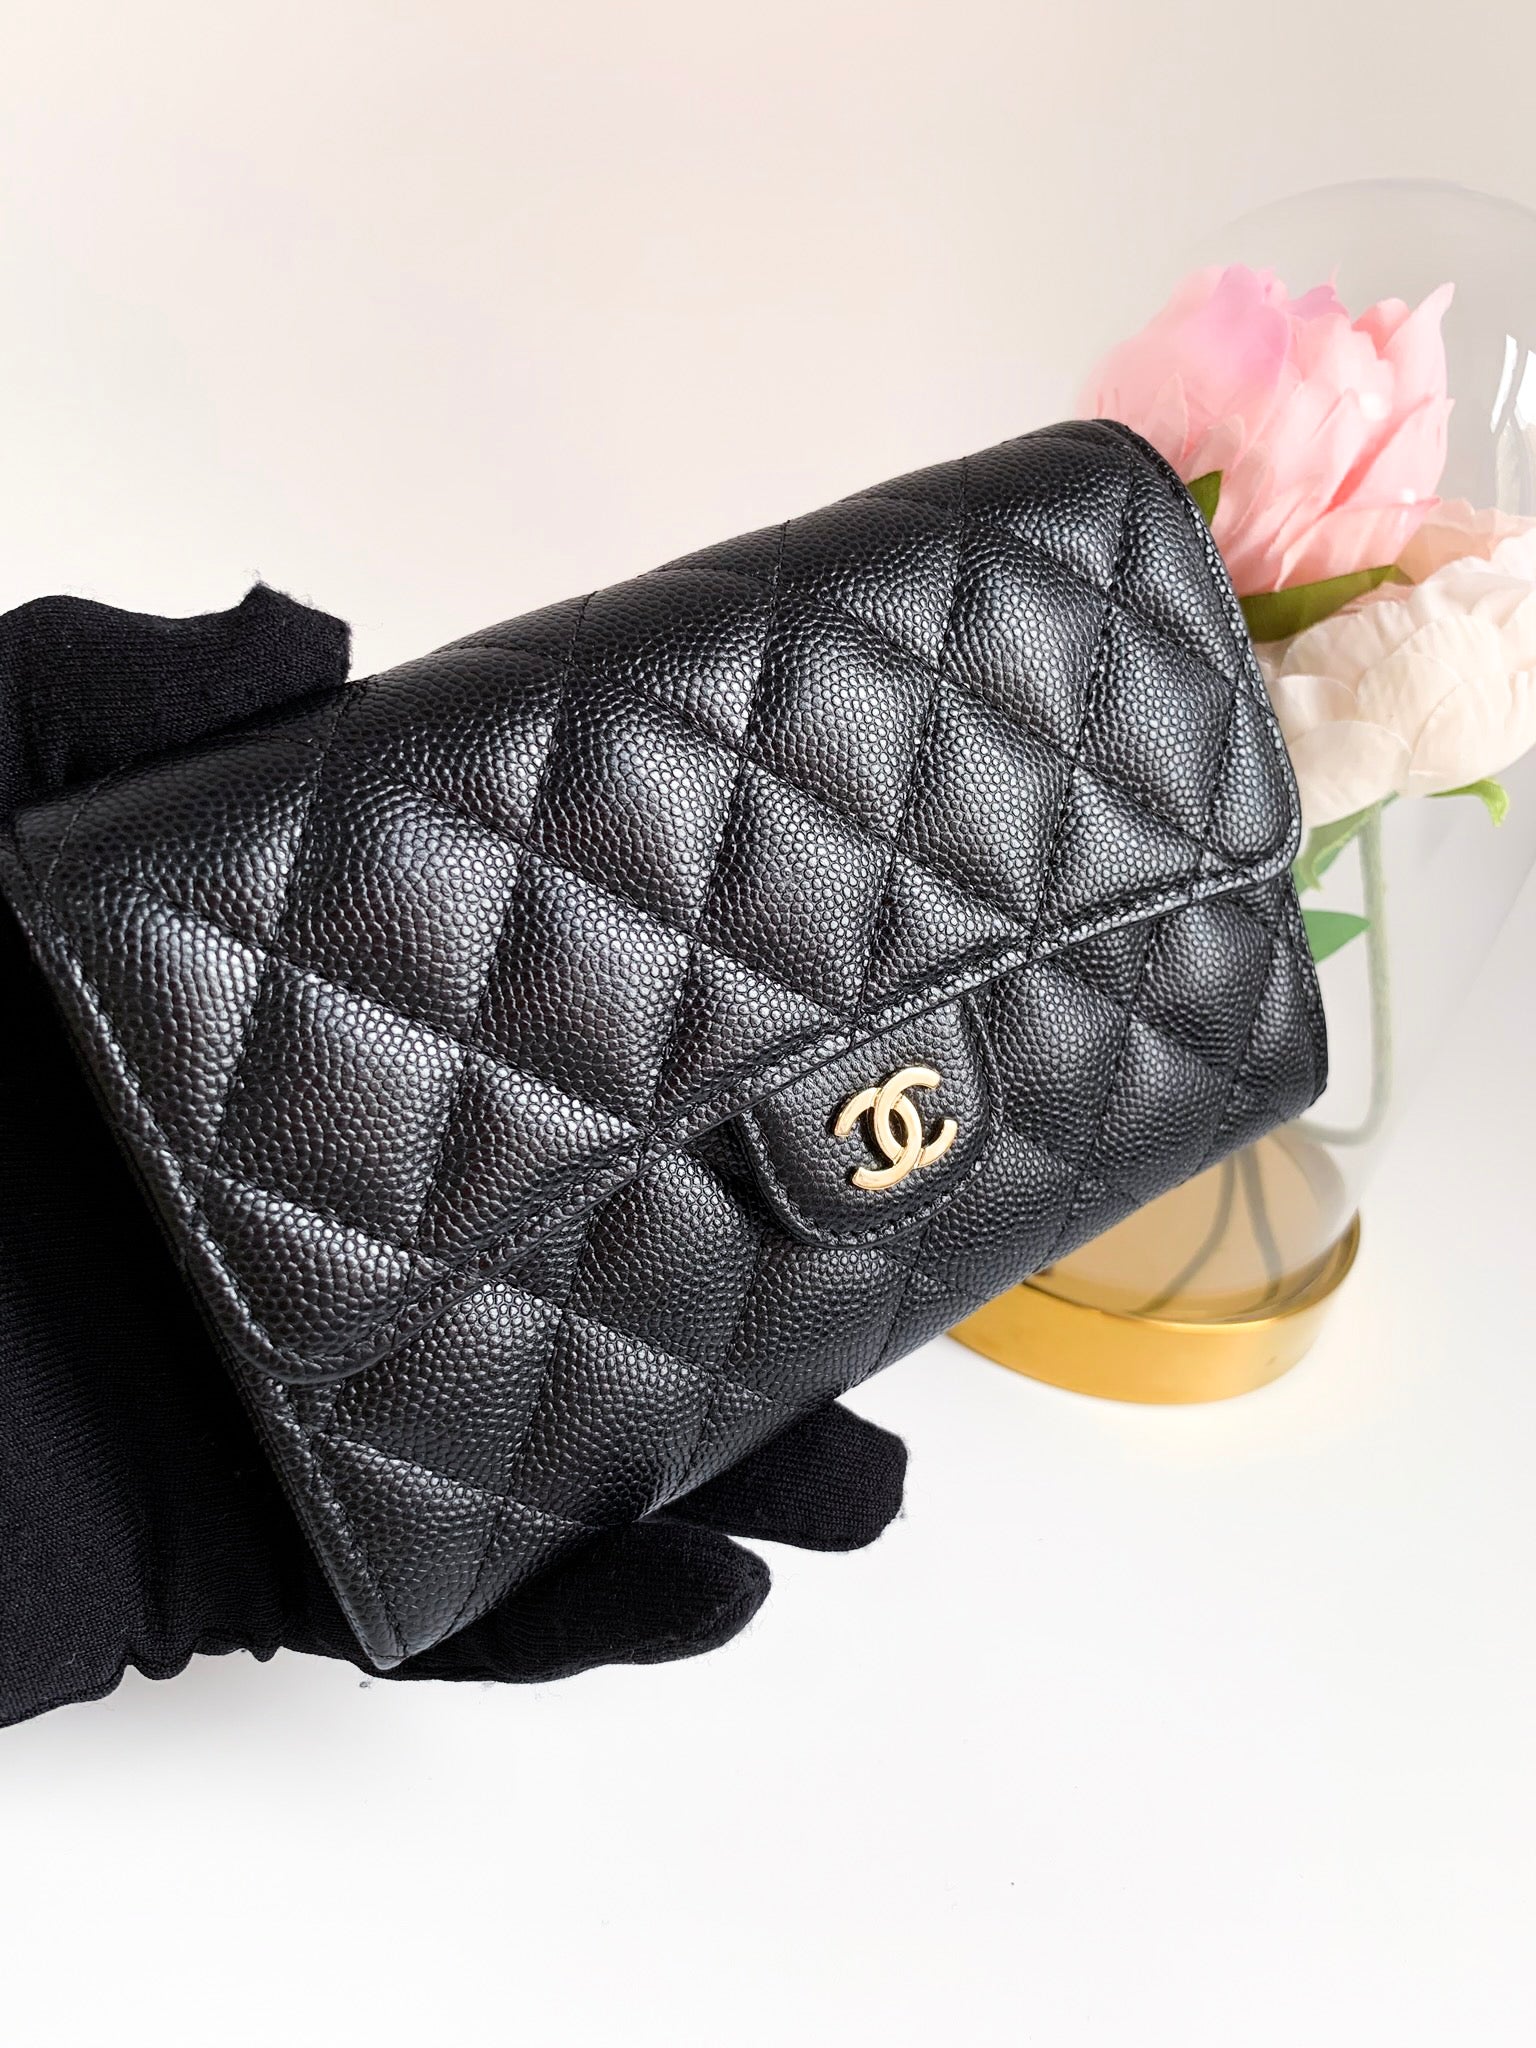 Chanel Classic Flap Wallet Black Caviar Gold Hardware⁣ – Coco Approved  Studio